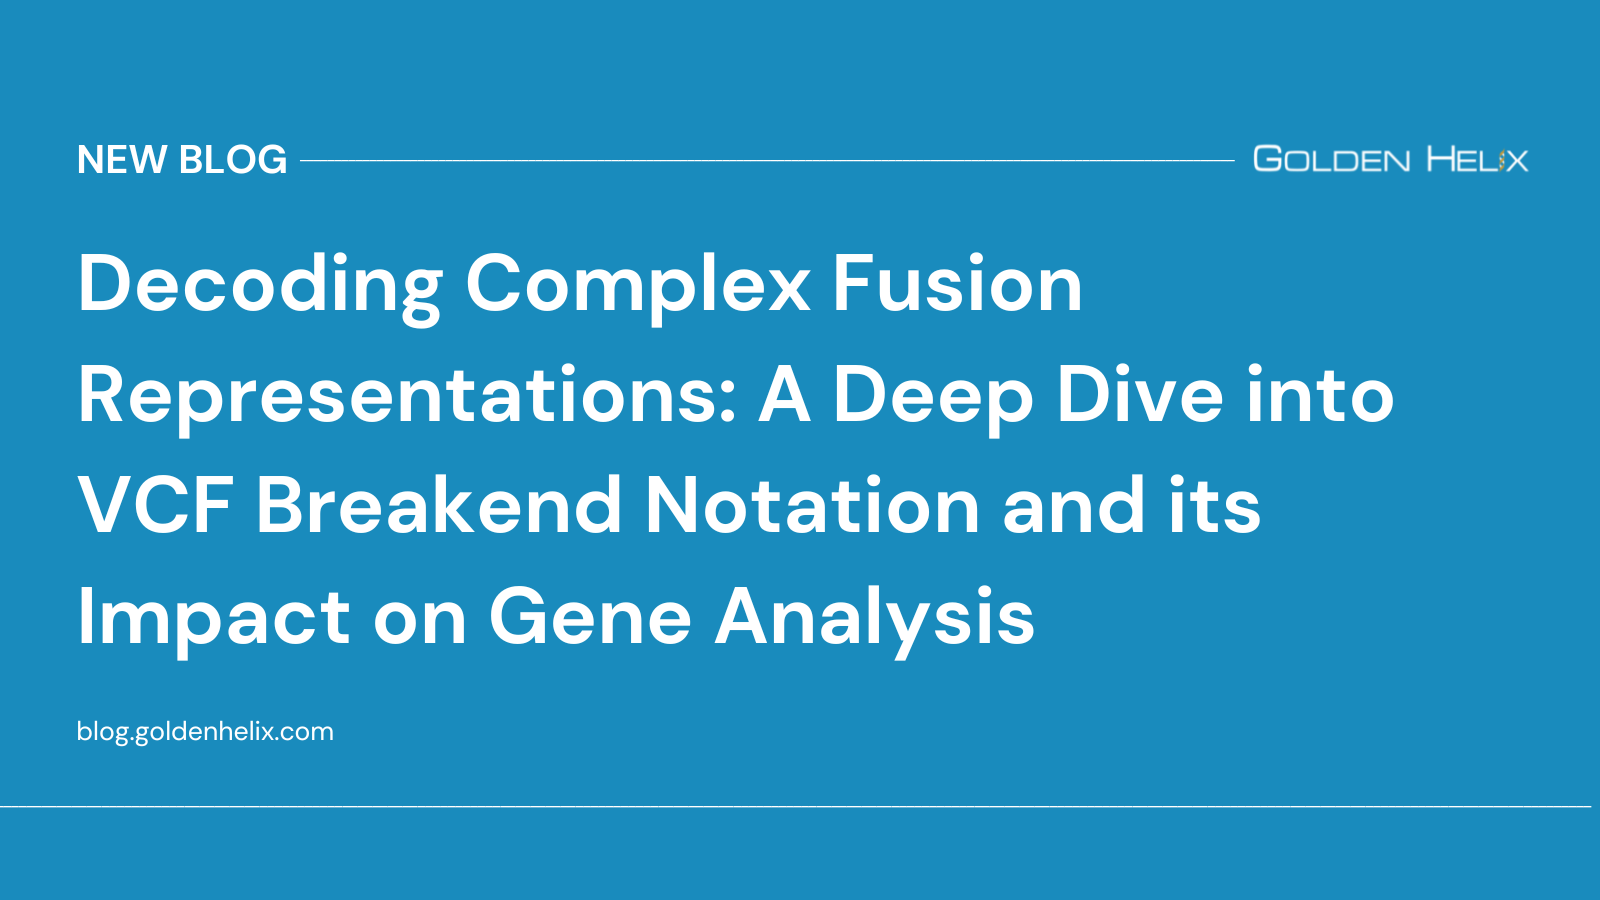 Decoding Complex Fusion Representations A Deep Dive into VCF Breakend Notation and its Impact on Gene Analysis